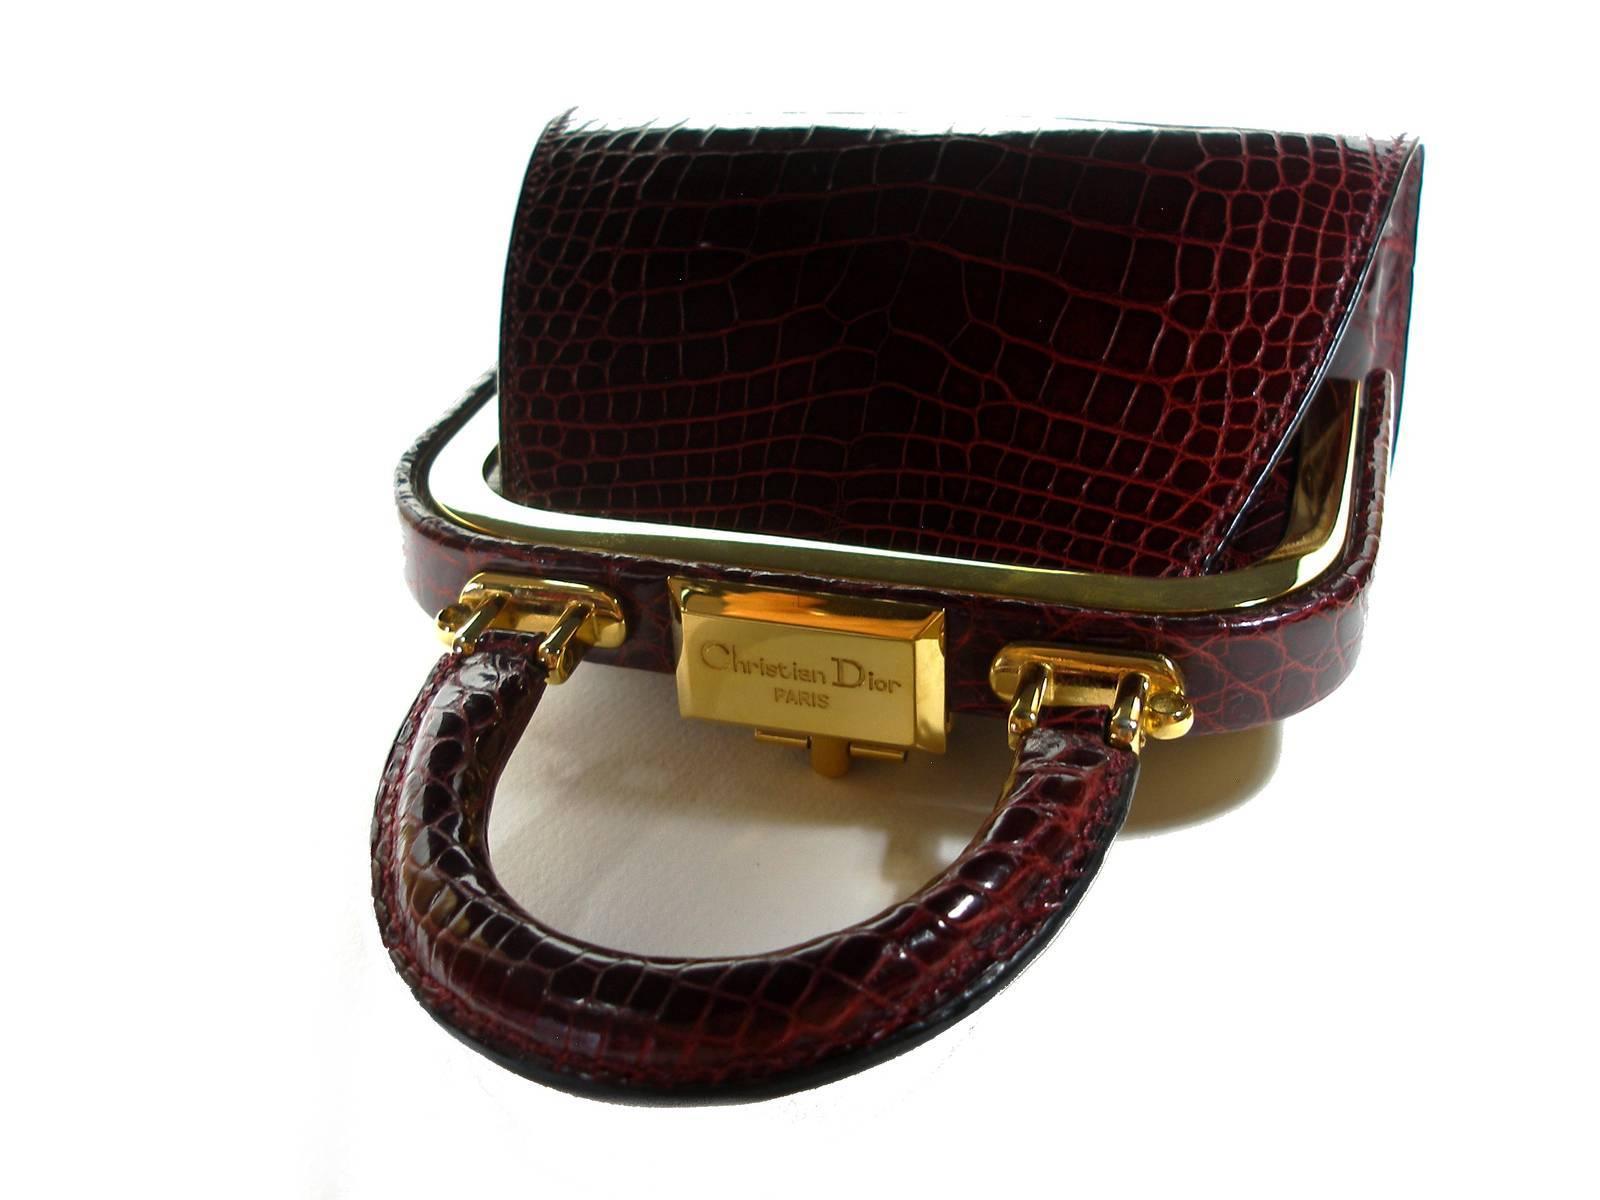 Christian Dior Vintage Rare Doctor Style Micro Handbag in Alligator Leather For Sale 6